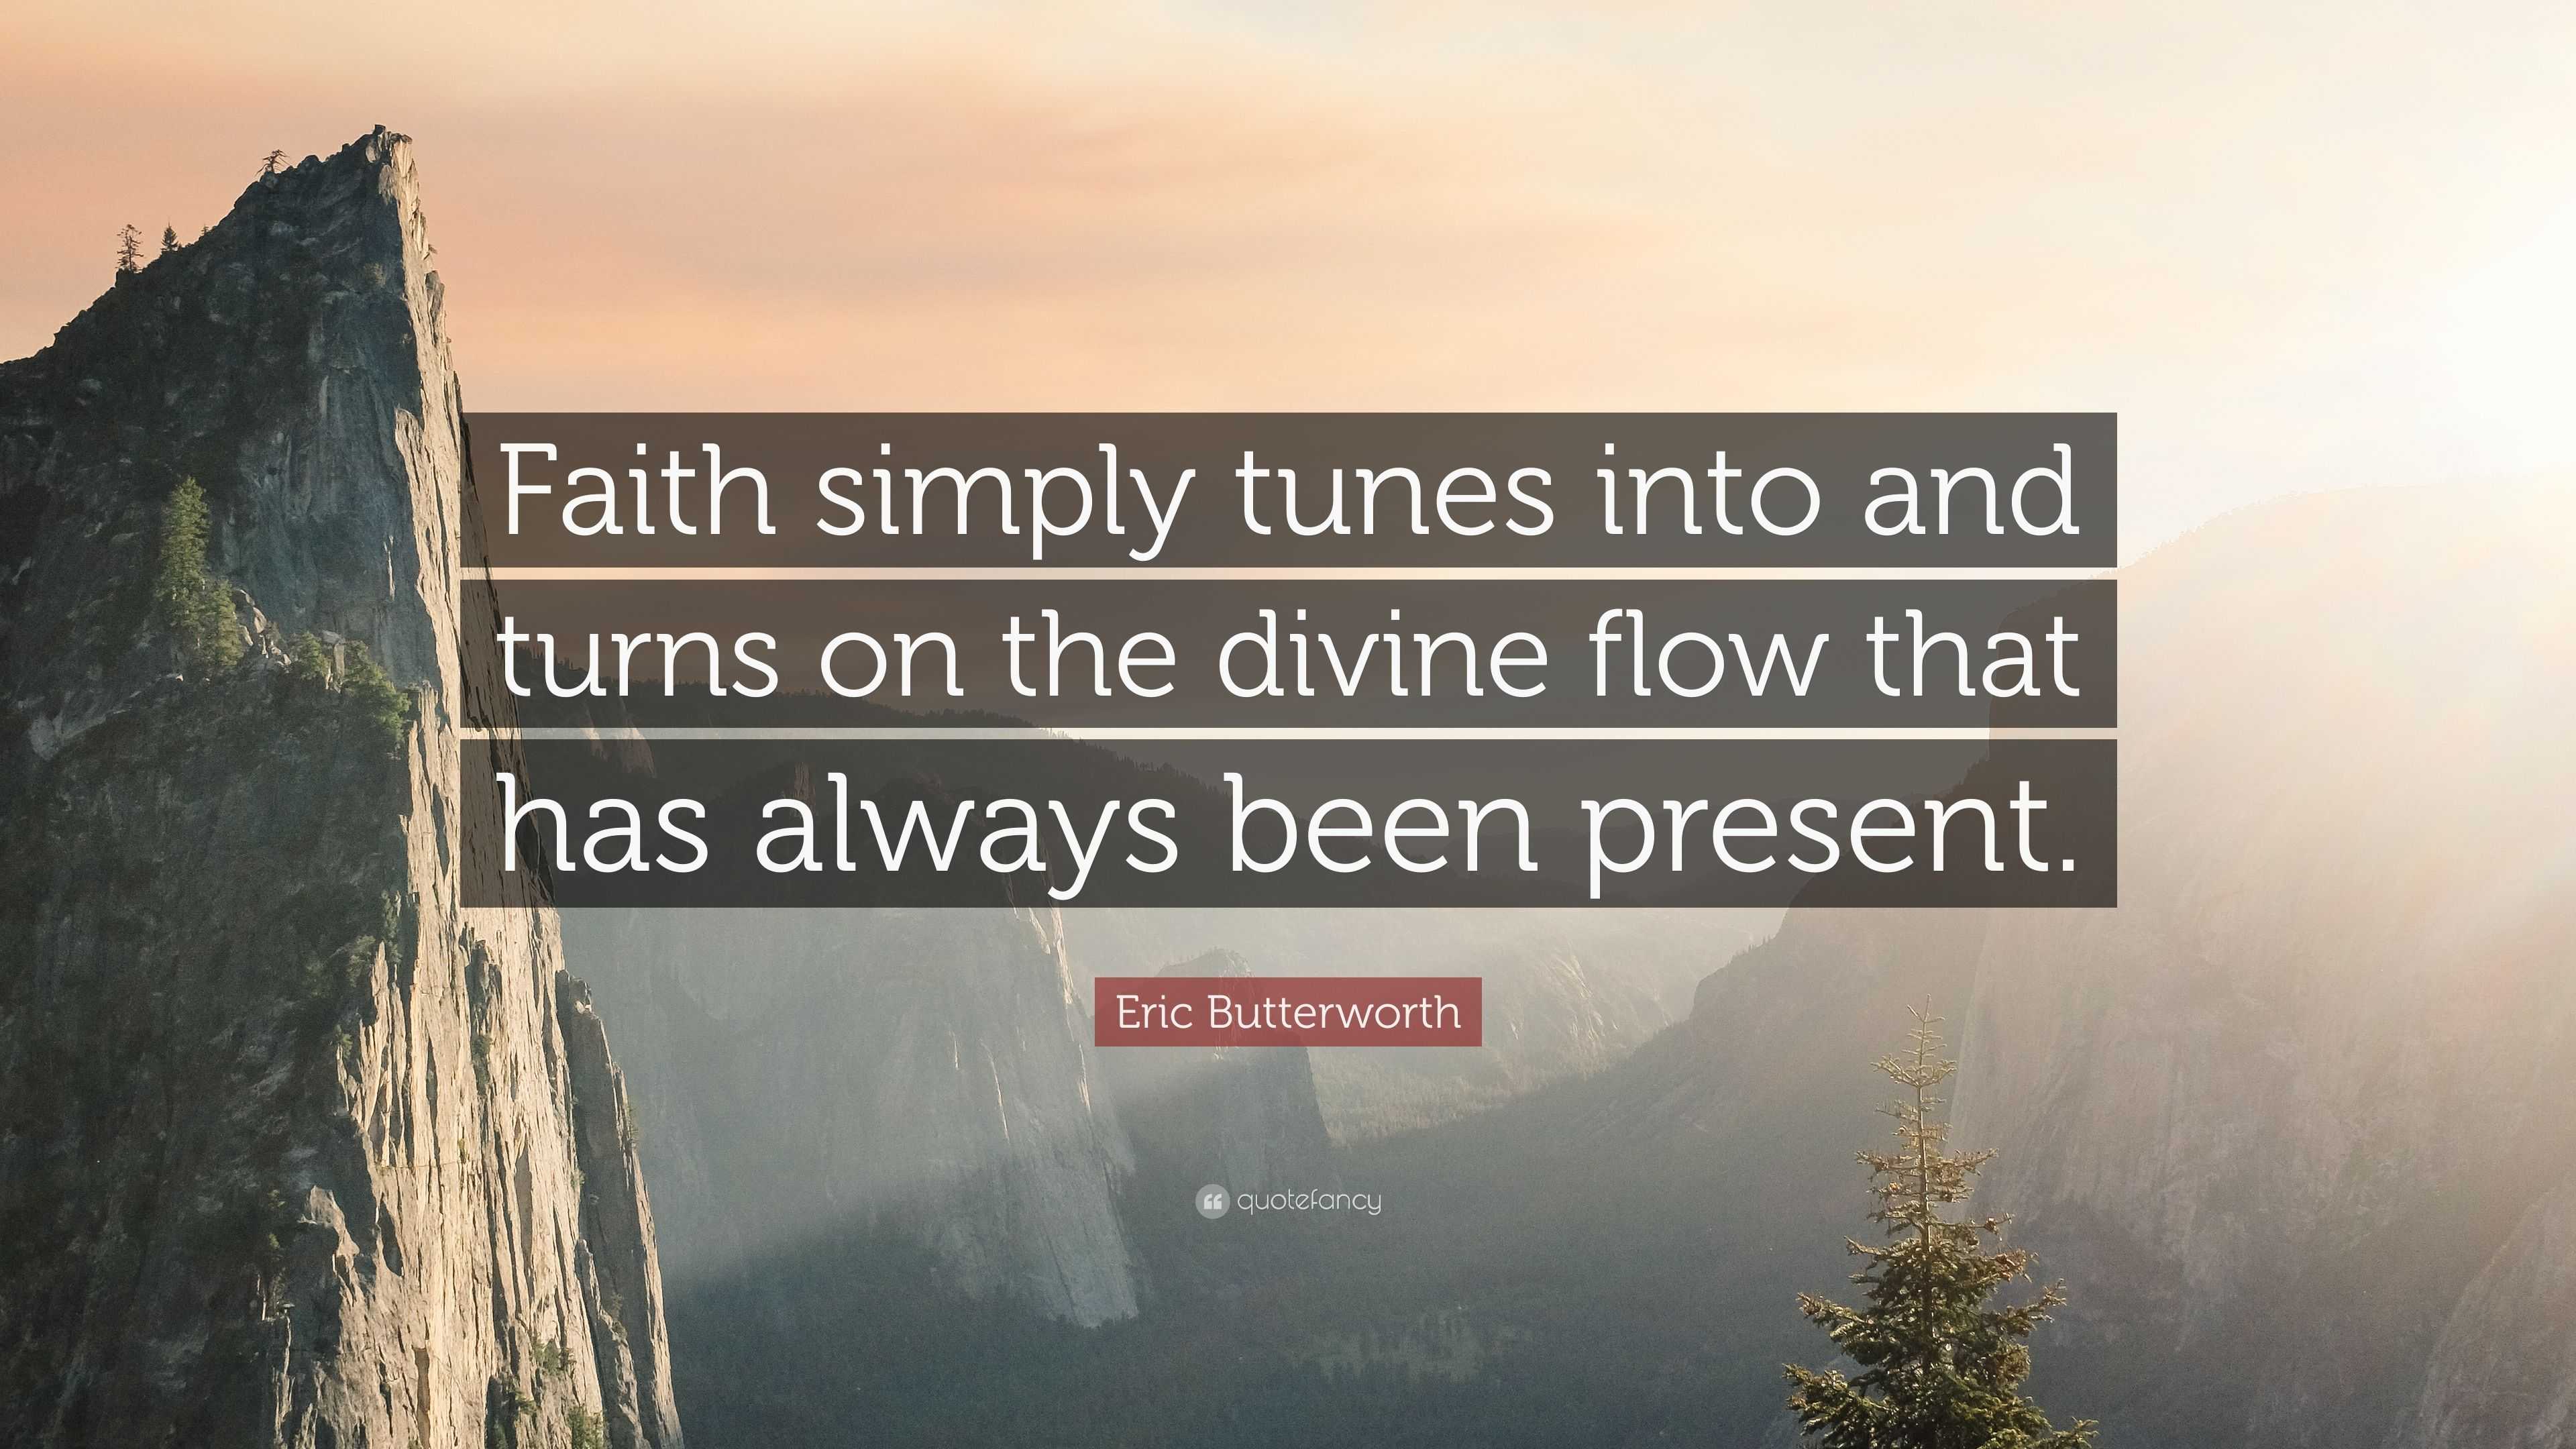 Eric Butterworth Quote: “Faith simply tunes into and turns on the